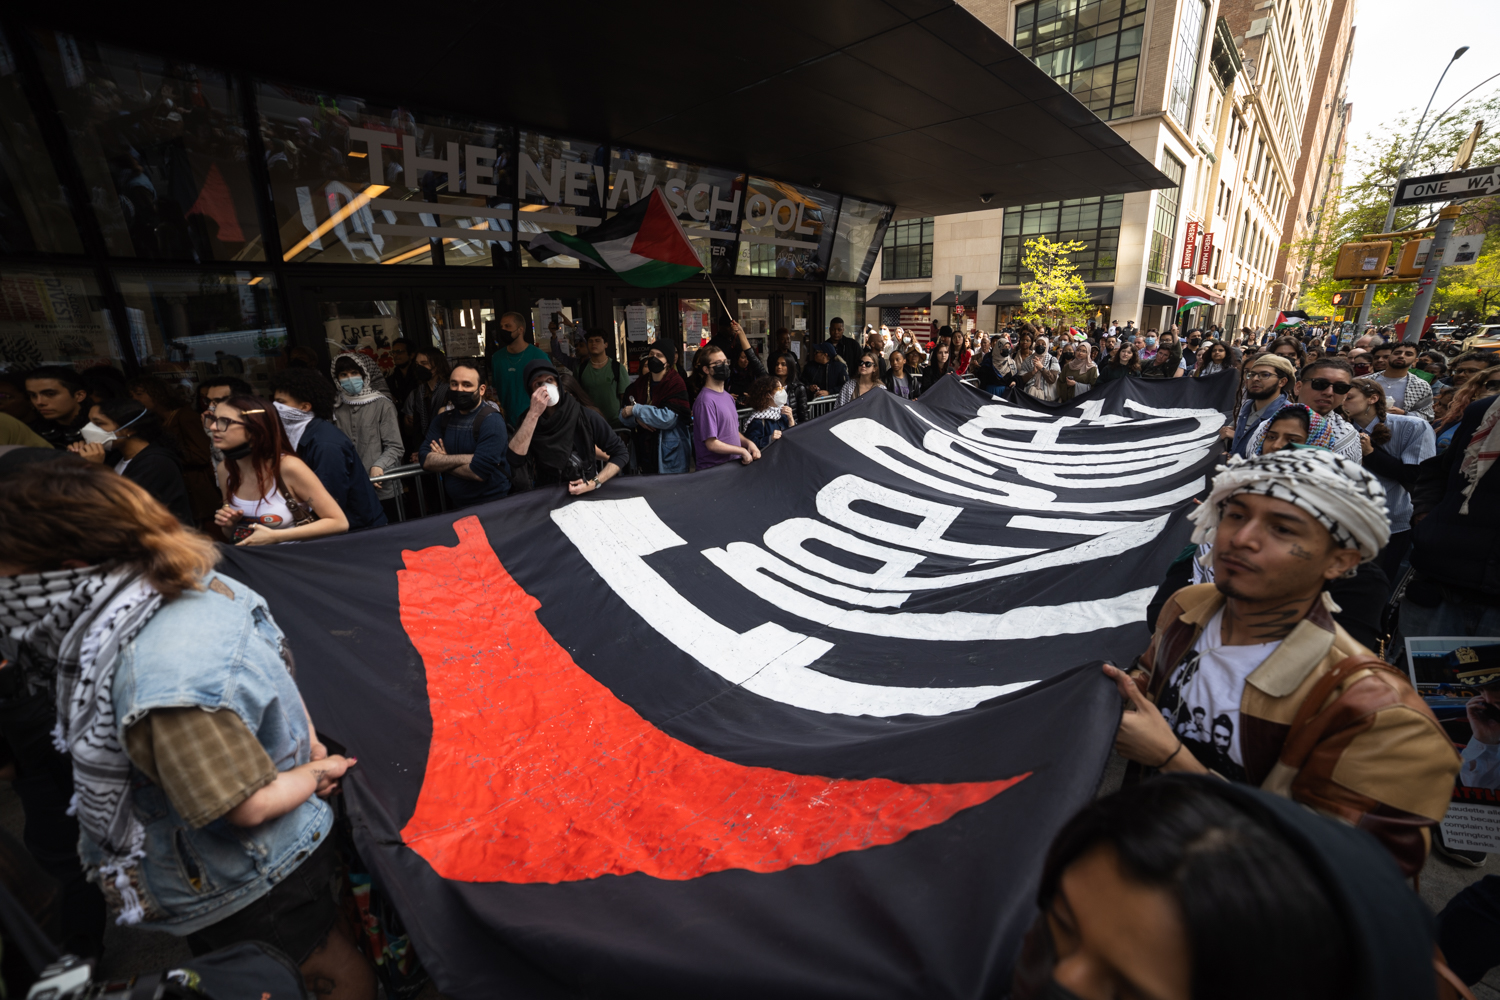 Protesters holding a black banner that reads “Free Palestine” outside The New School.